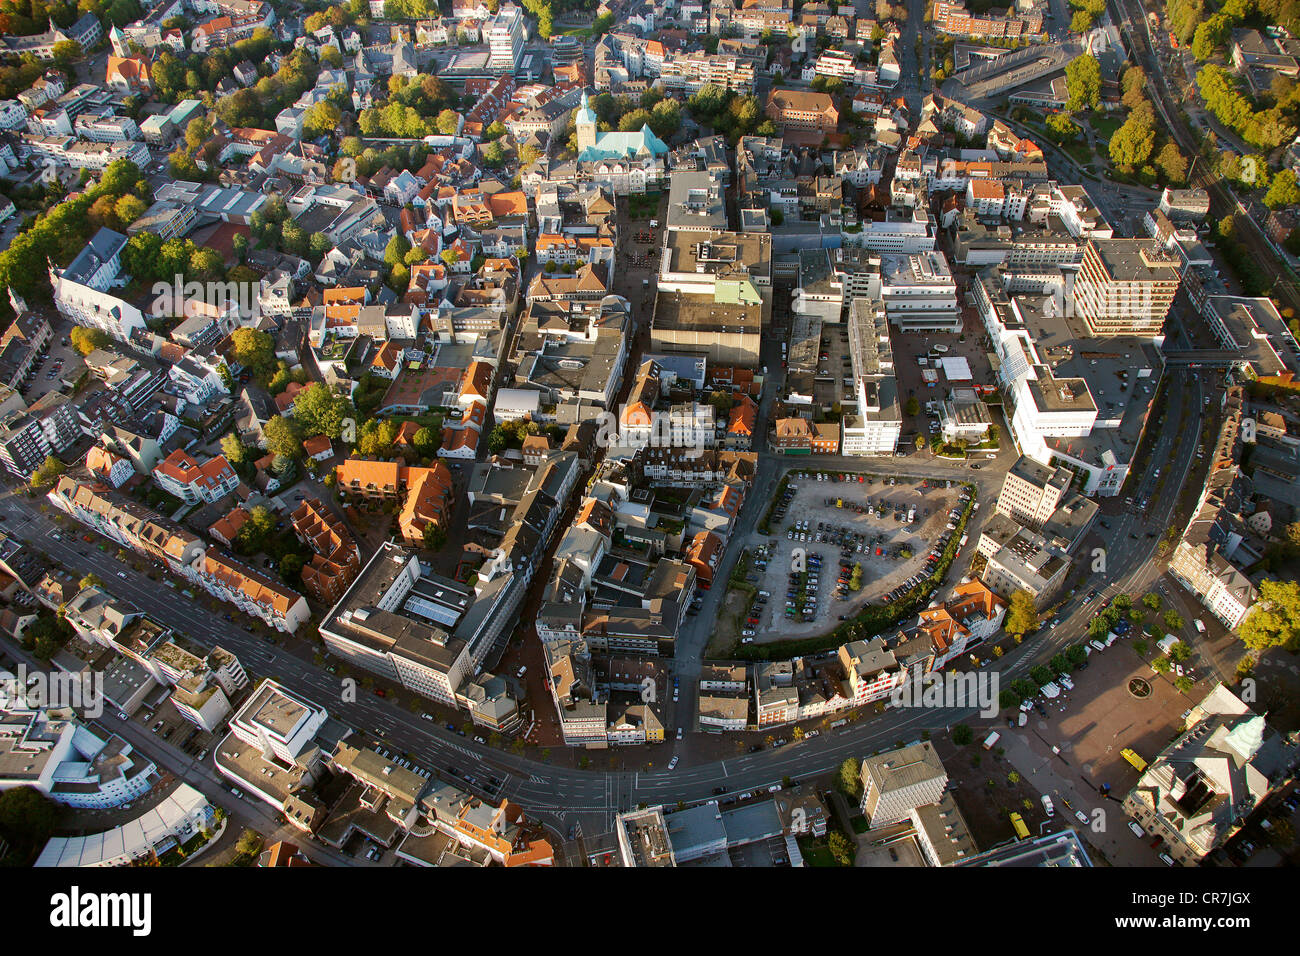 Aerial view, inner city ring road with Loehrhof Center, shopping centre, Recklinghausen, Ruhr Area, North Rhine-Westphalia Stock Photo